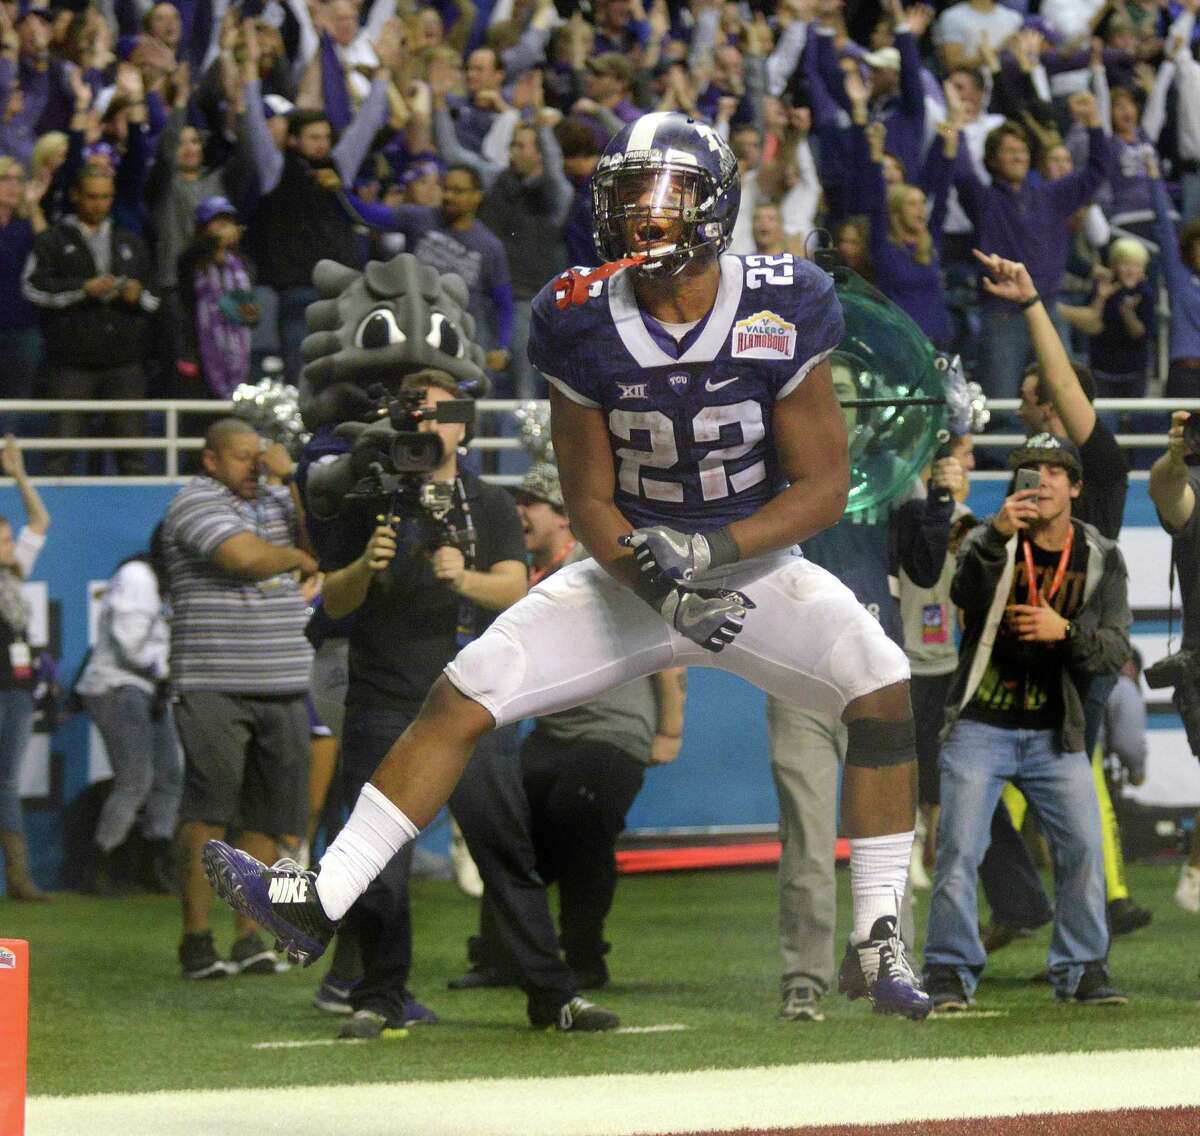 TCU running back Aaron Green celebrates after scoring a touchdown against Oregon in the 2016 Valero Alamo Bowl. A reader says Derrick Fox, president and CEO of the Alamo Bowl, makes too much money, especially compared to public officials with more important duties.